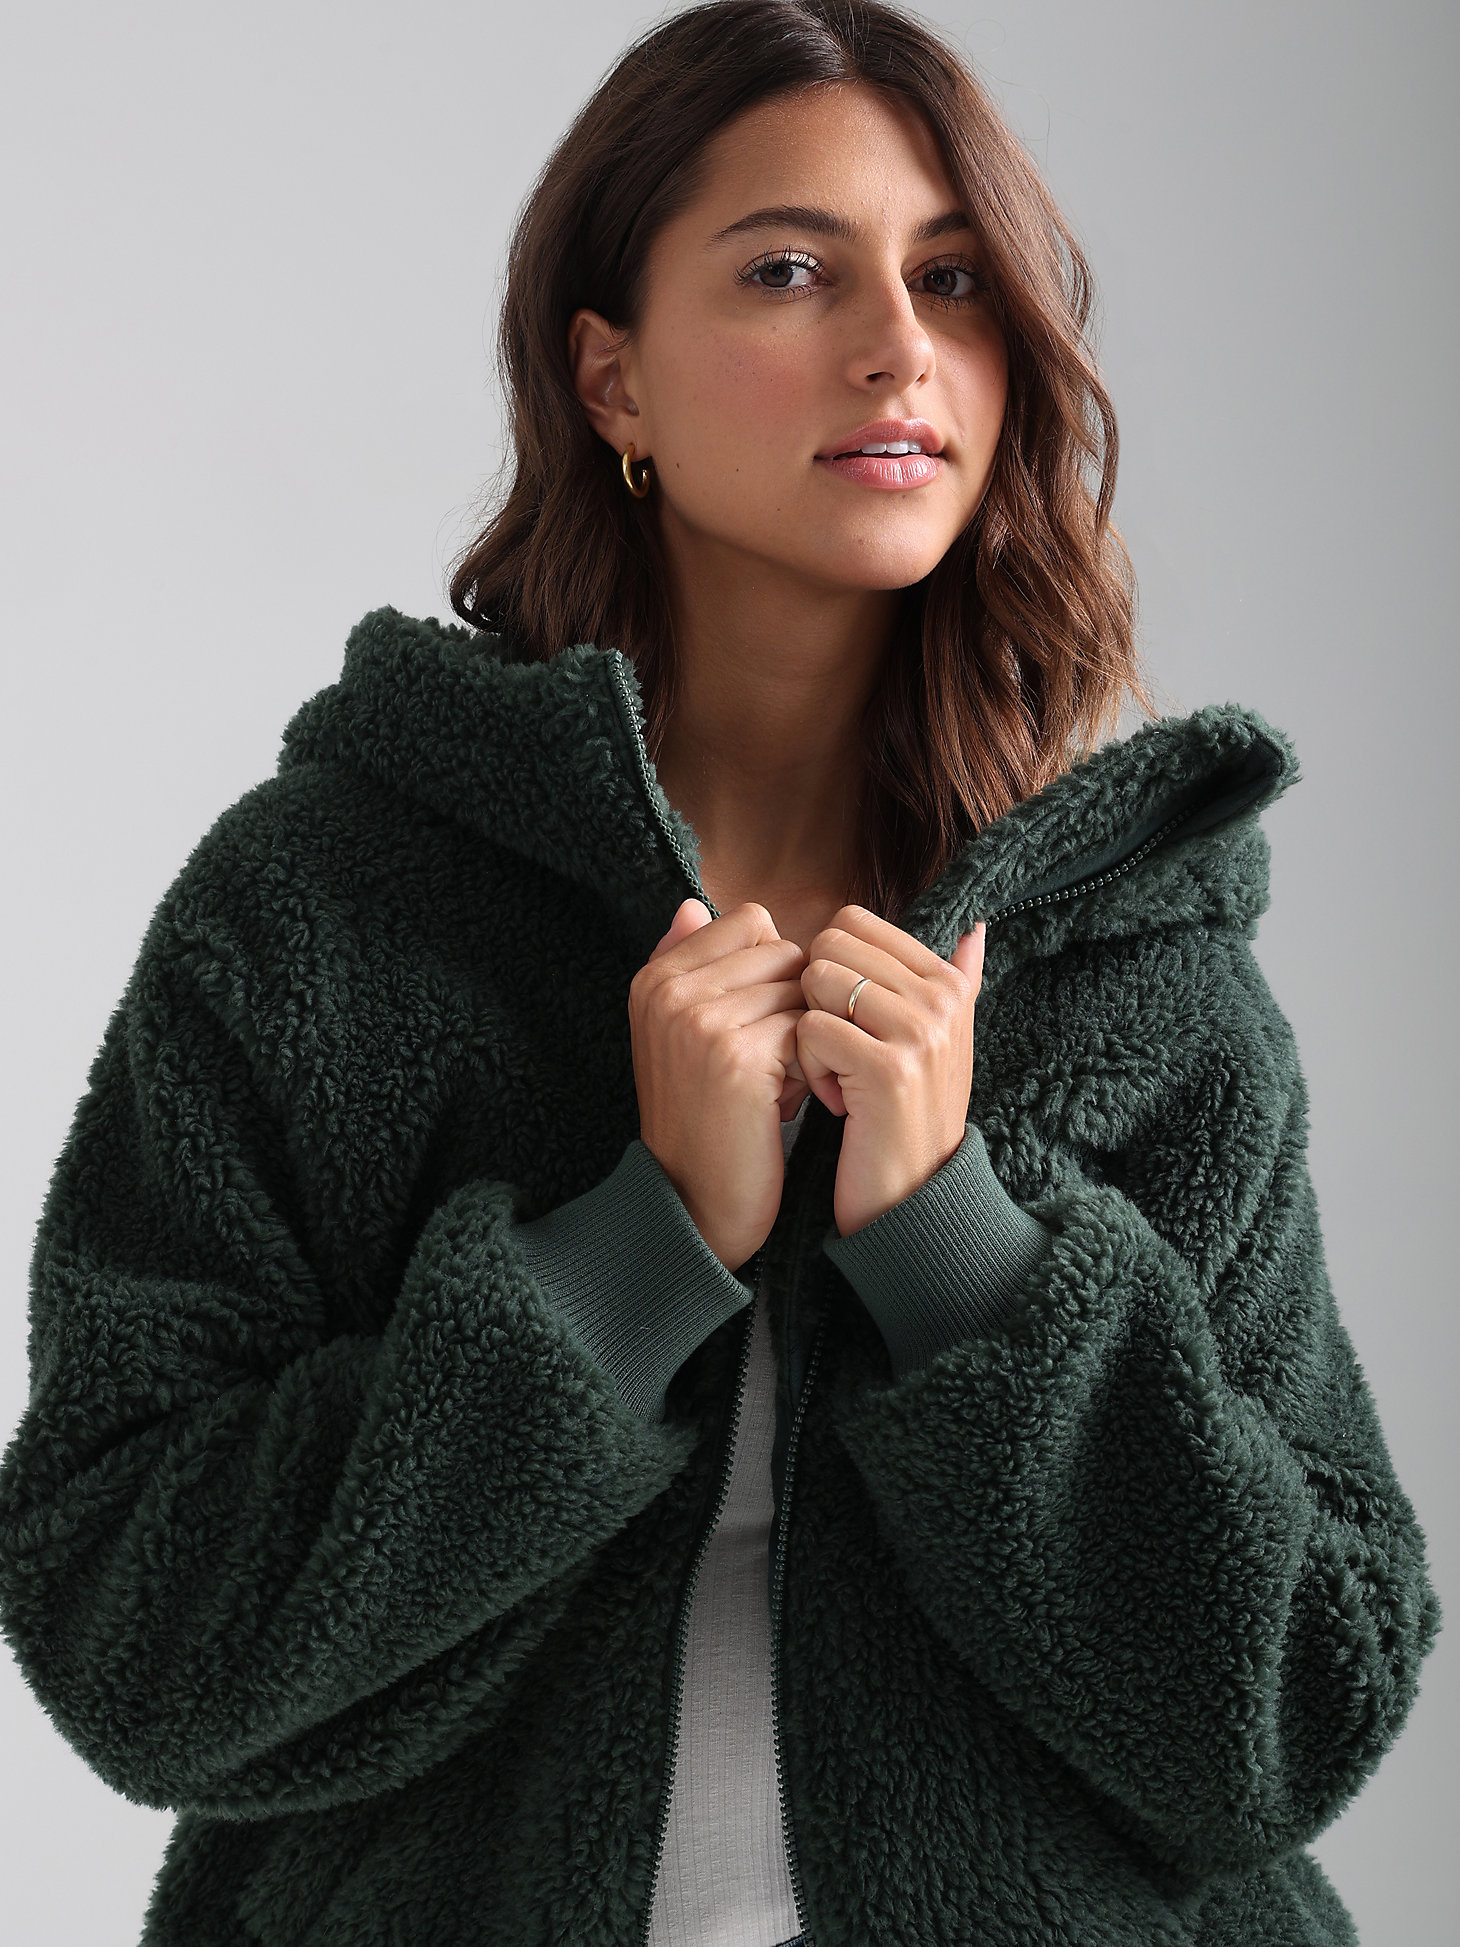 Women's Hooded Sherpa Jacket in Sycamore Green alternative view 1